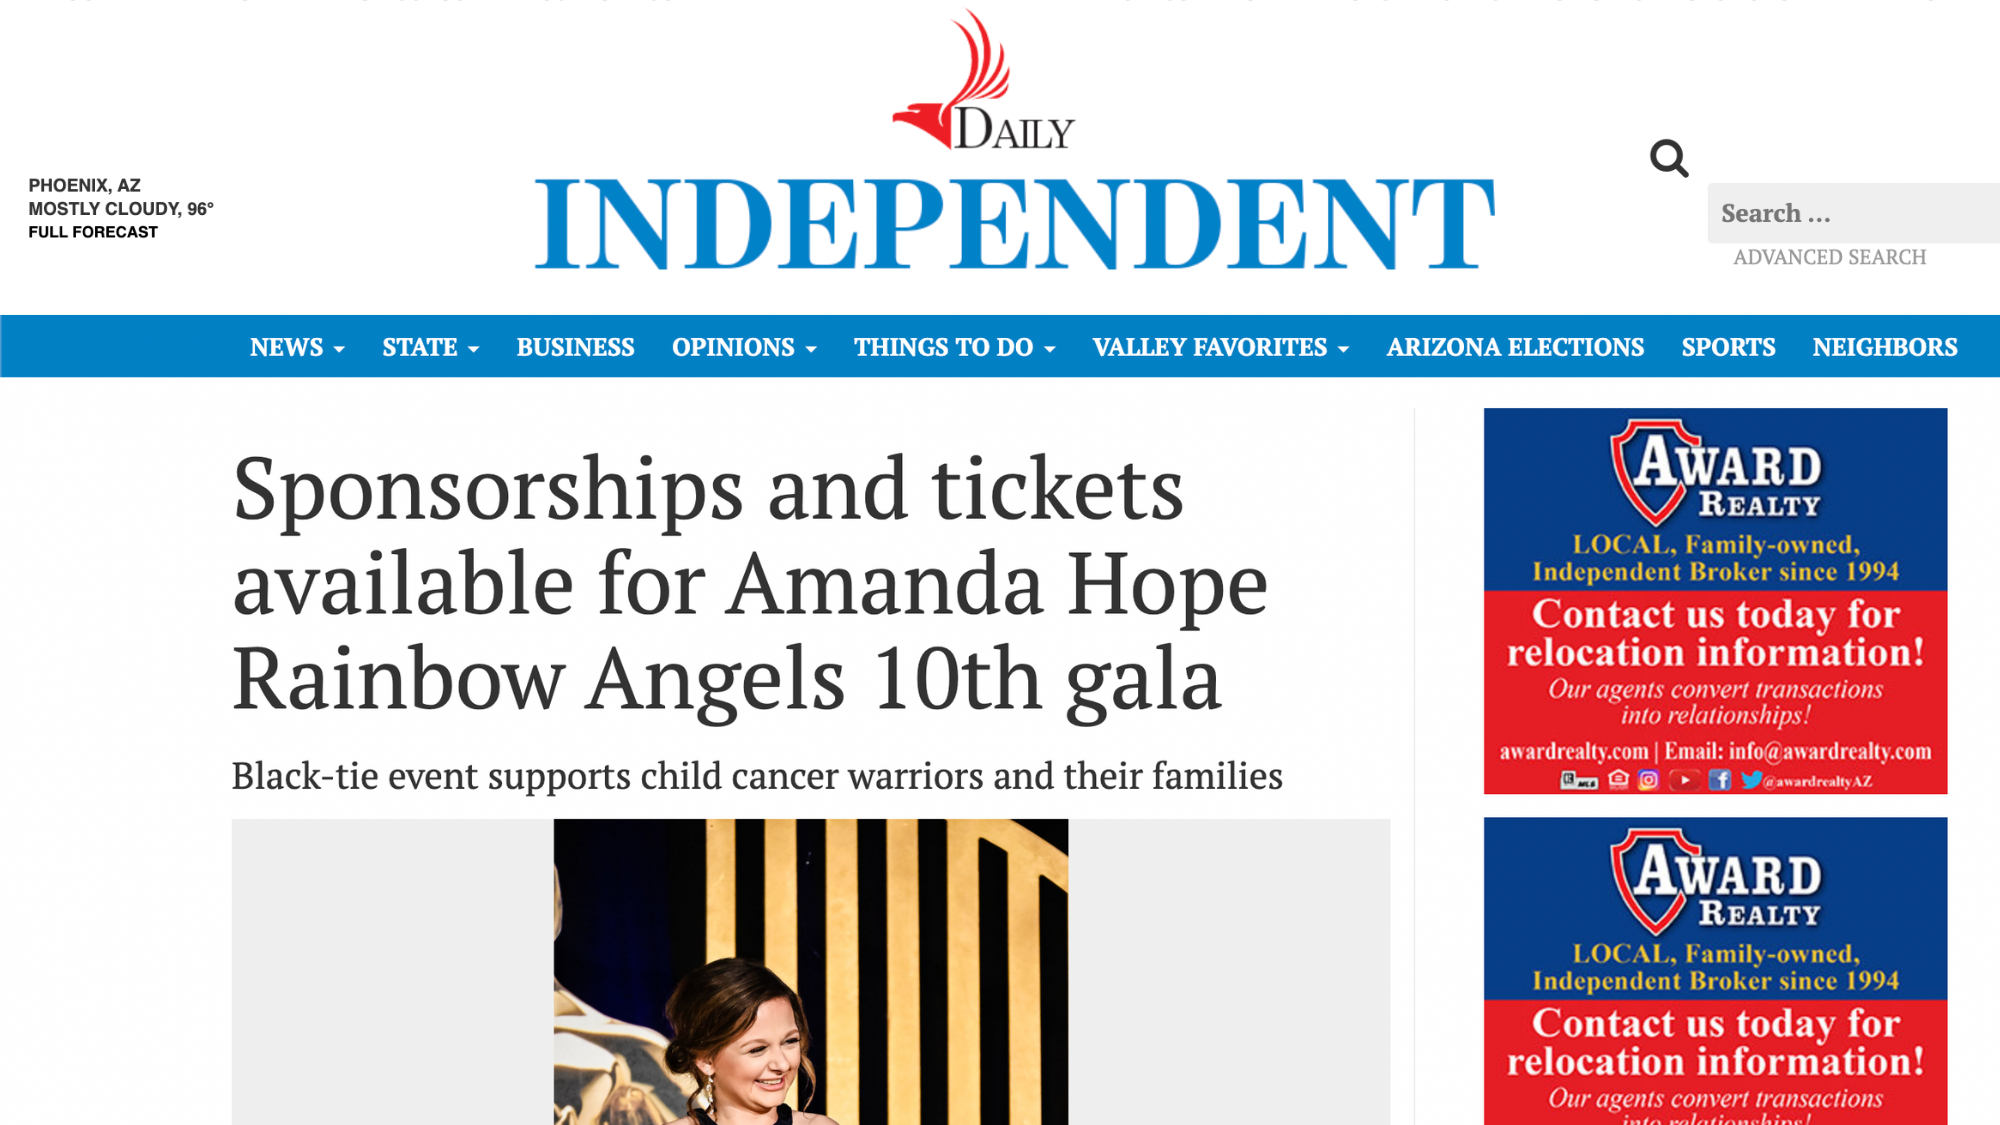 Daily Independent: Sponsorships and tickets available for Amanda Hope Rainbow Angels 10th gala (Copy)